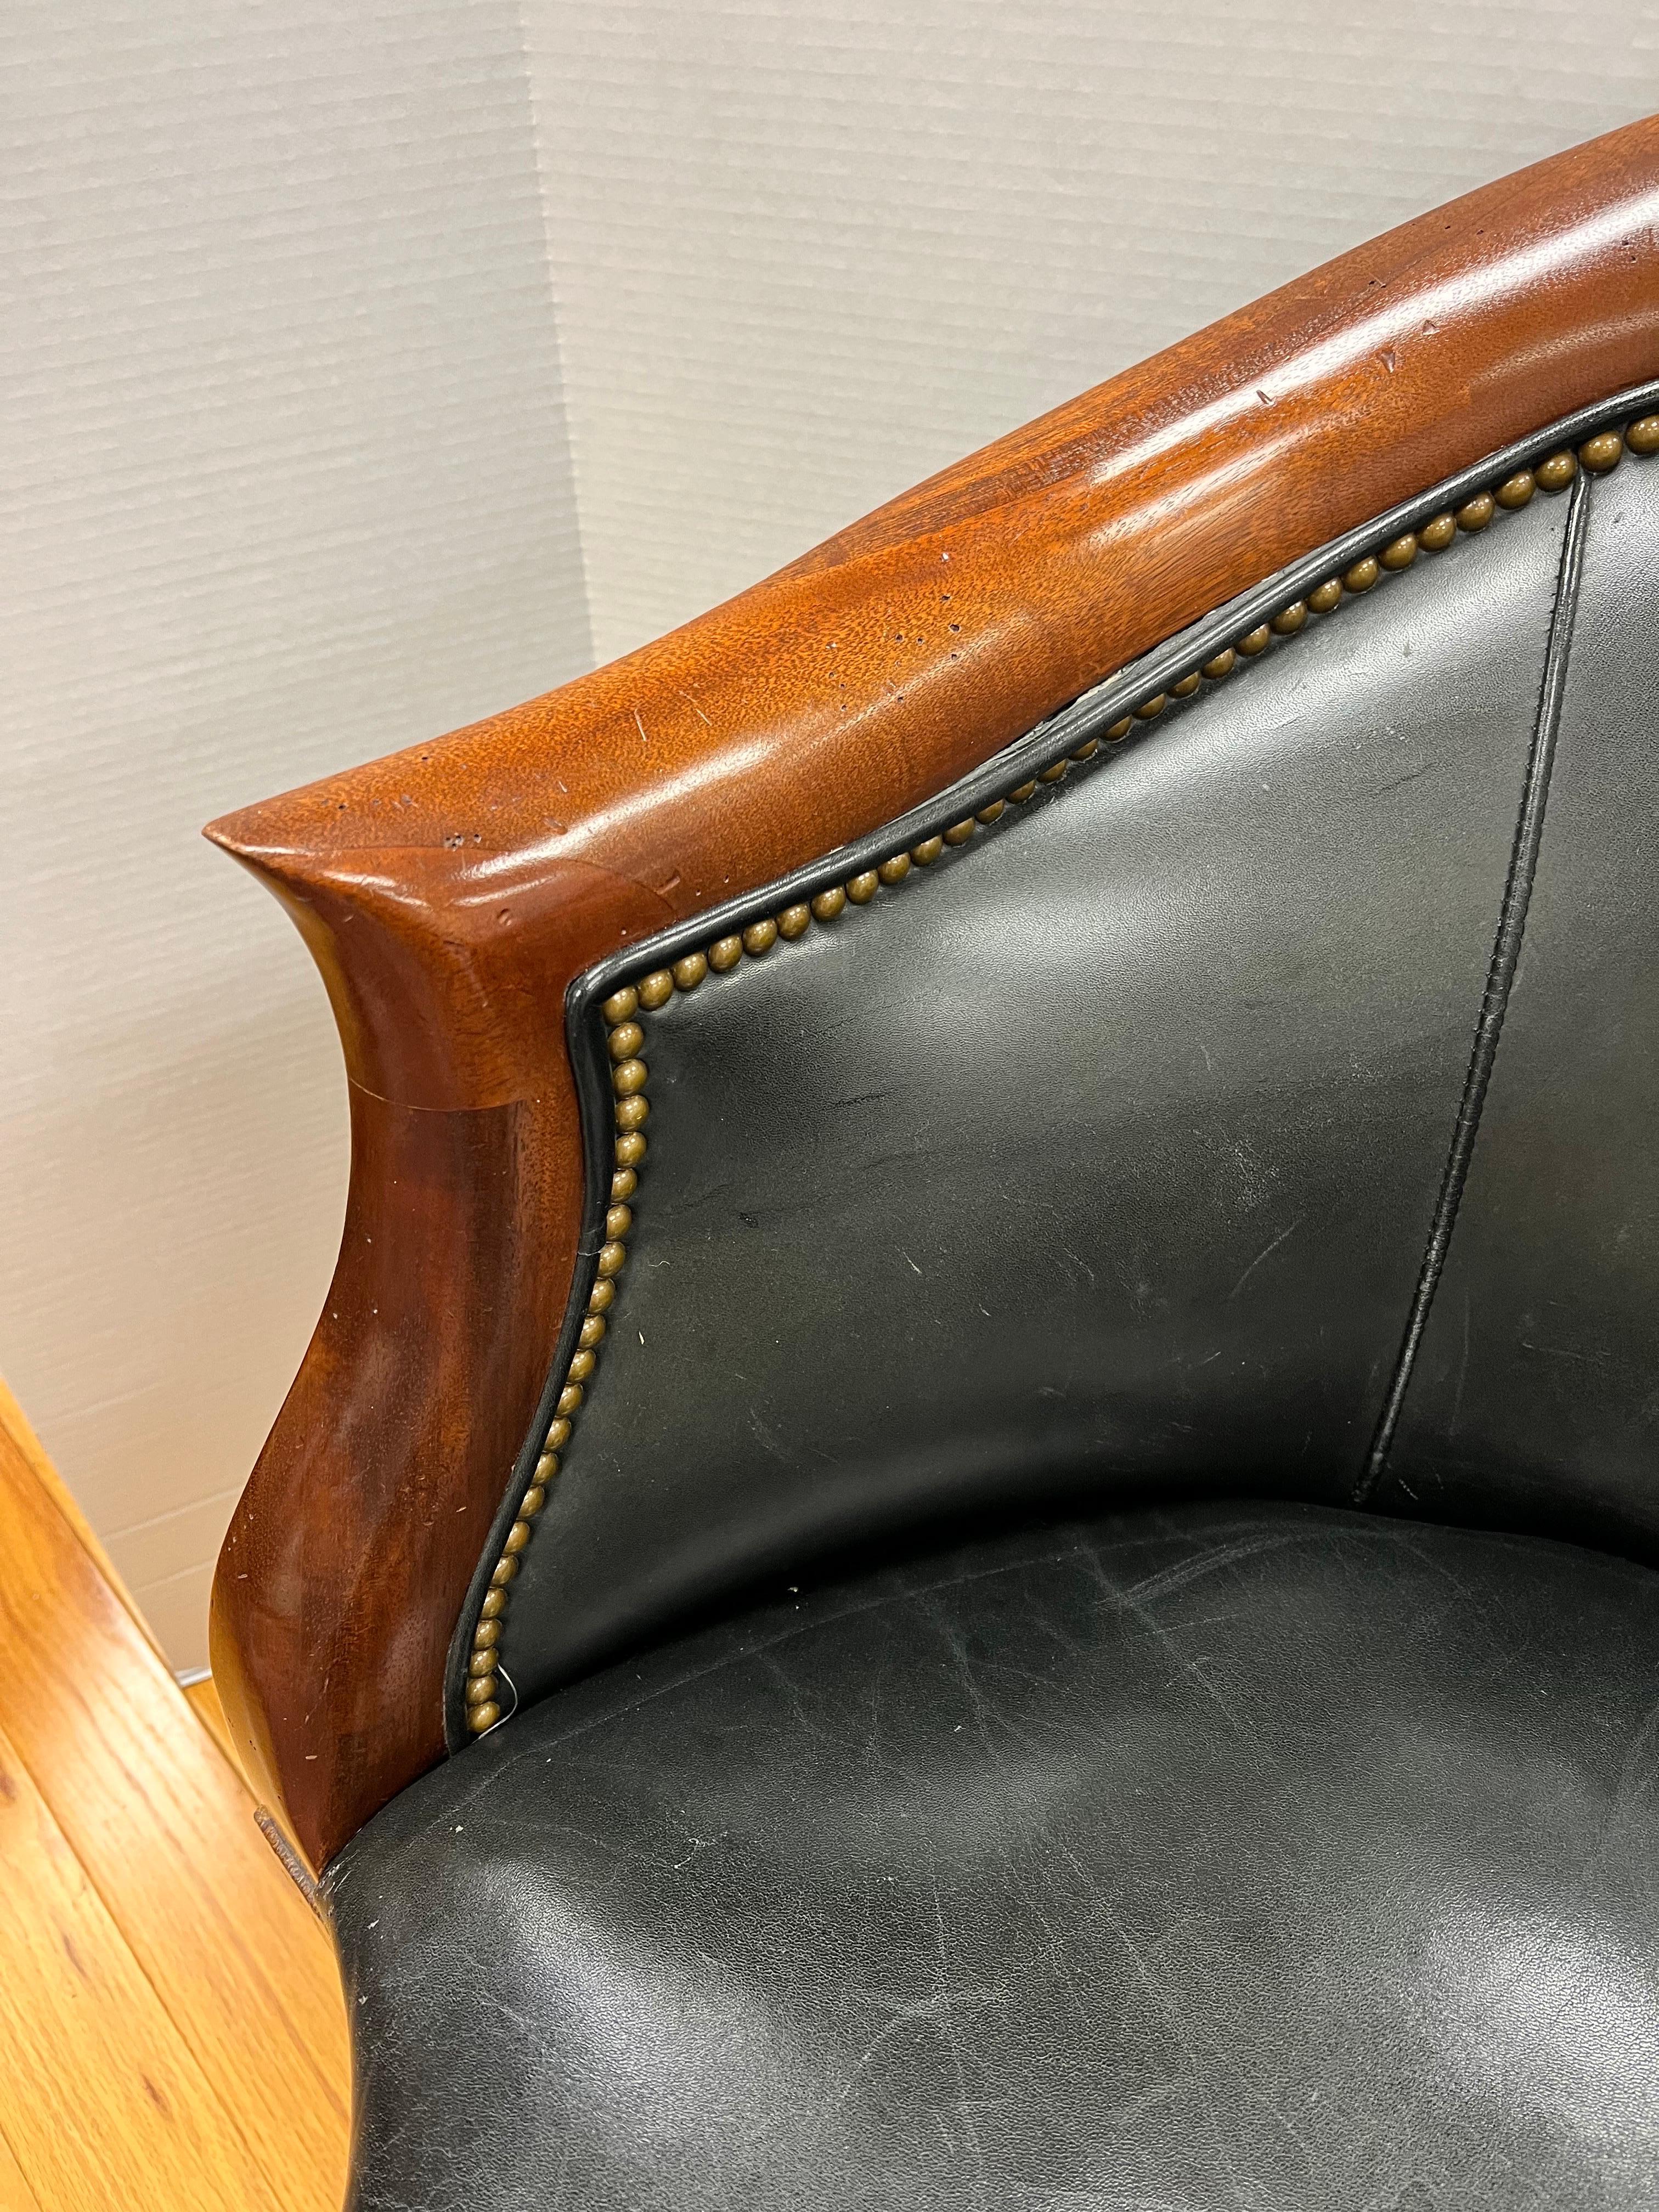 Handsome mahogany corner chair with soft black leather upholstery. Rich details include star inlay pattern and carved flute legs with antique brass nailheads all around. Tres elegant, indeed!